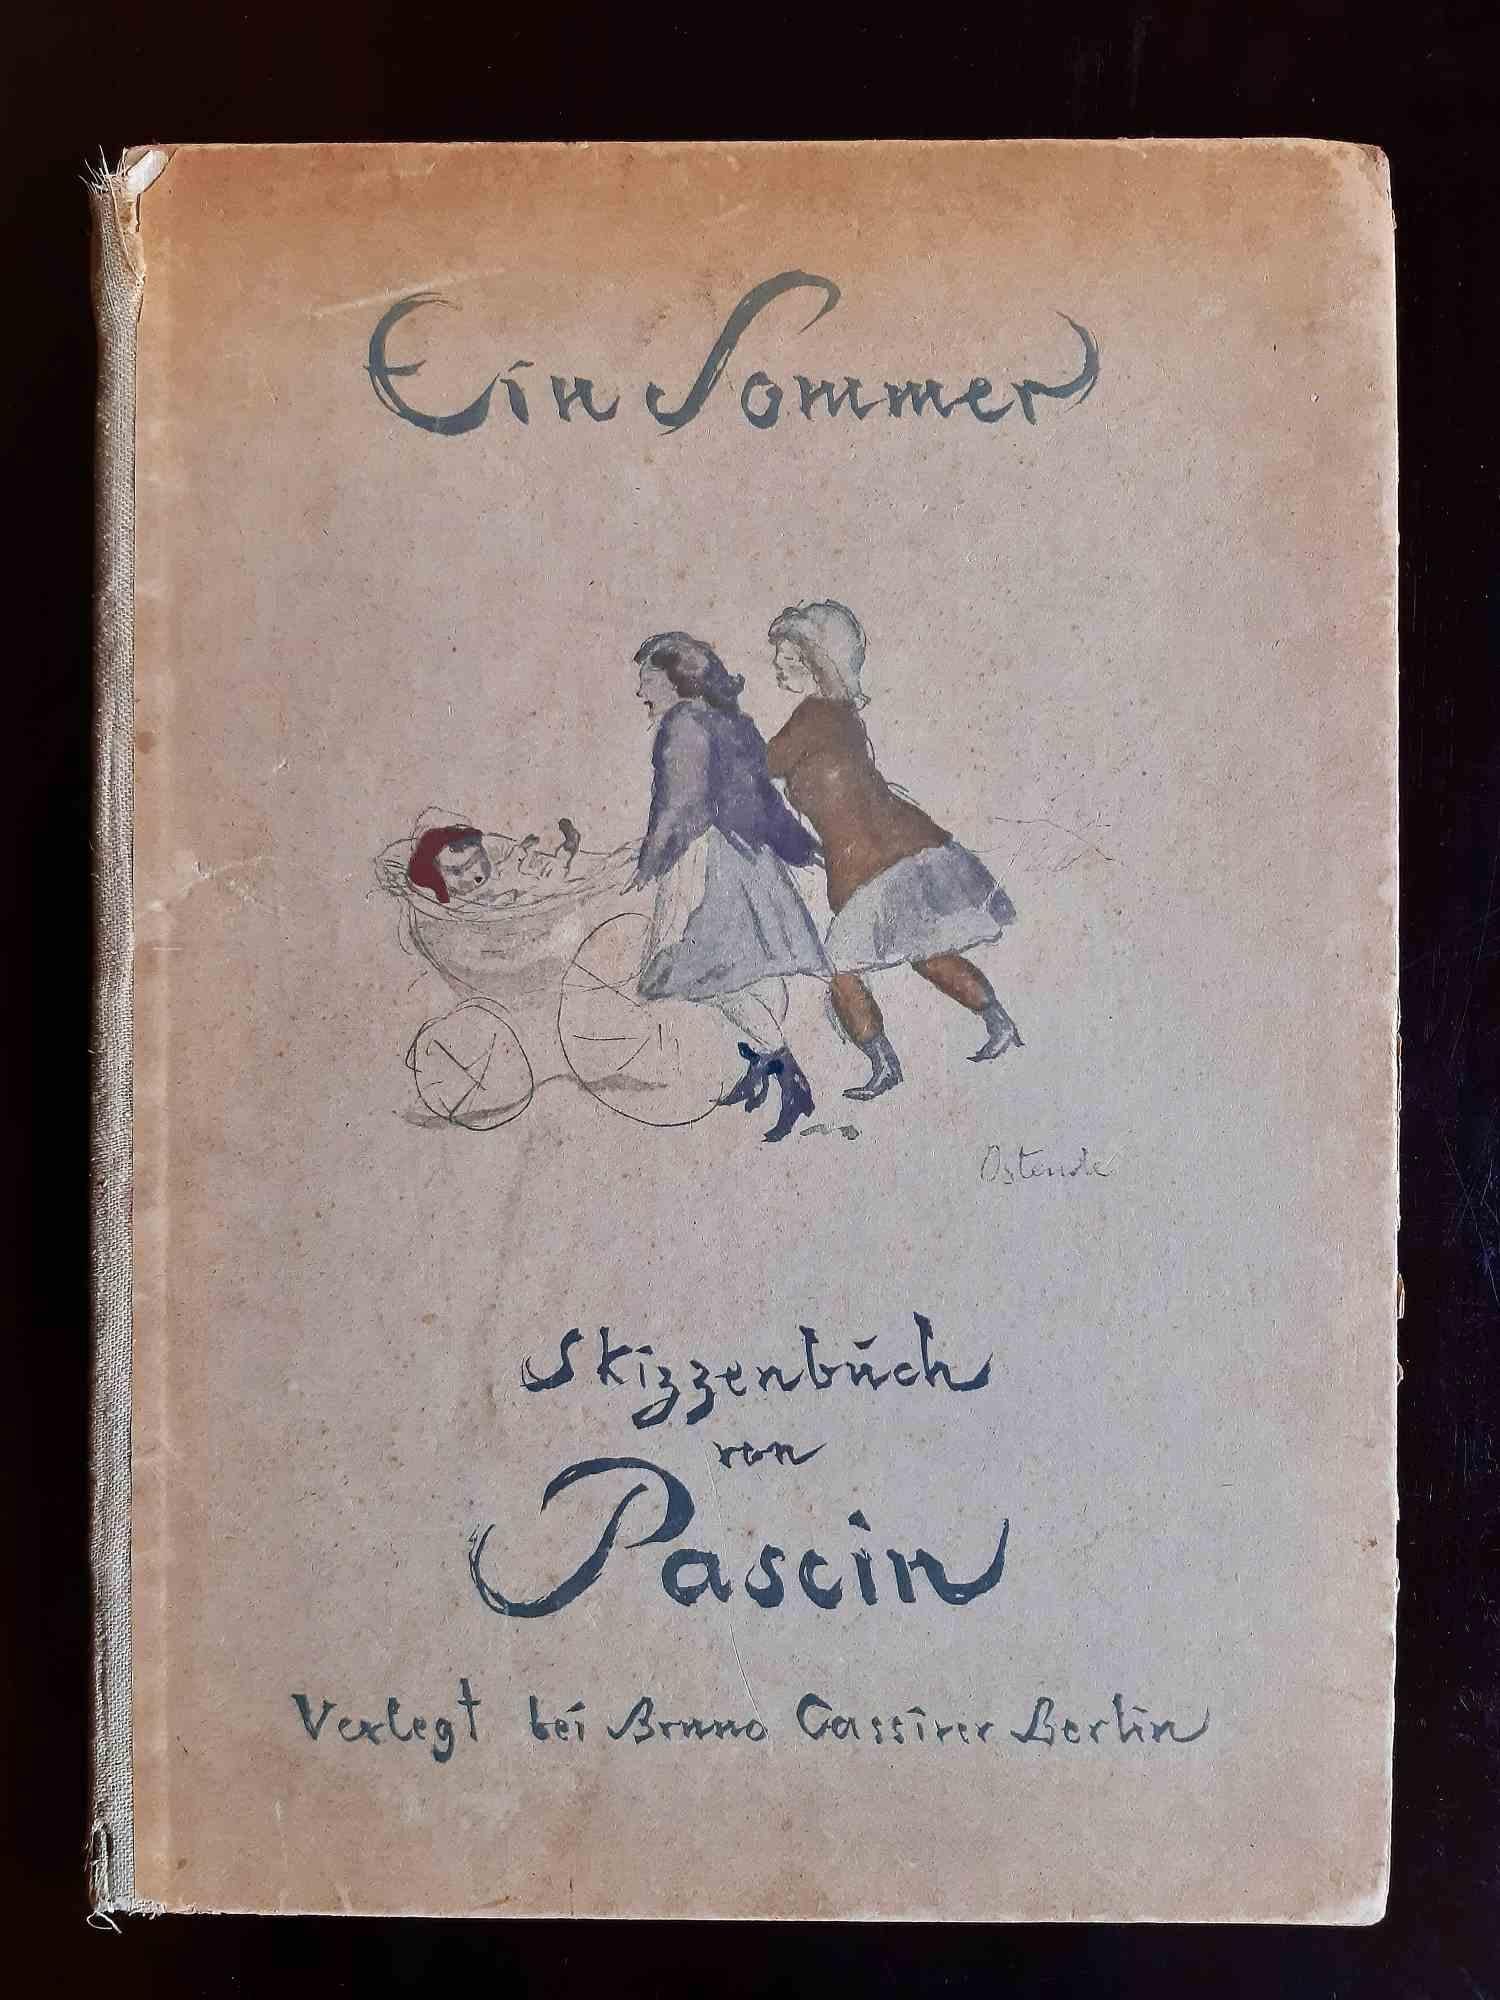 Ein Sommer - Original Rare Book Illustrated by Jules Pascin - 1920 For Sale 4